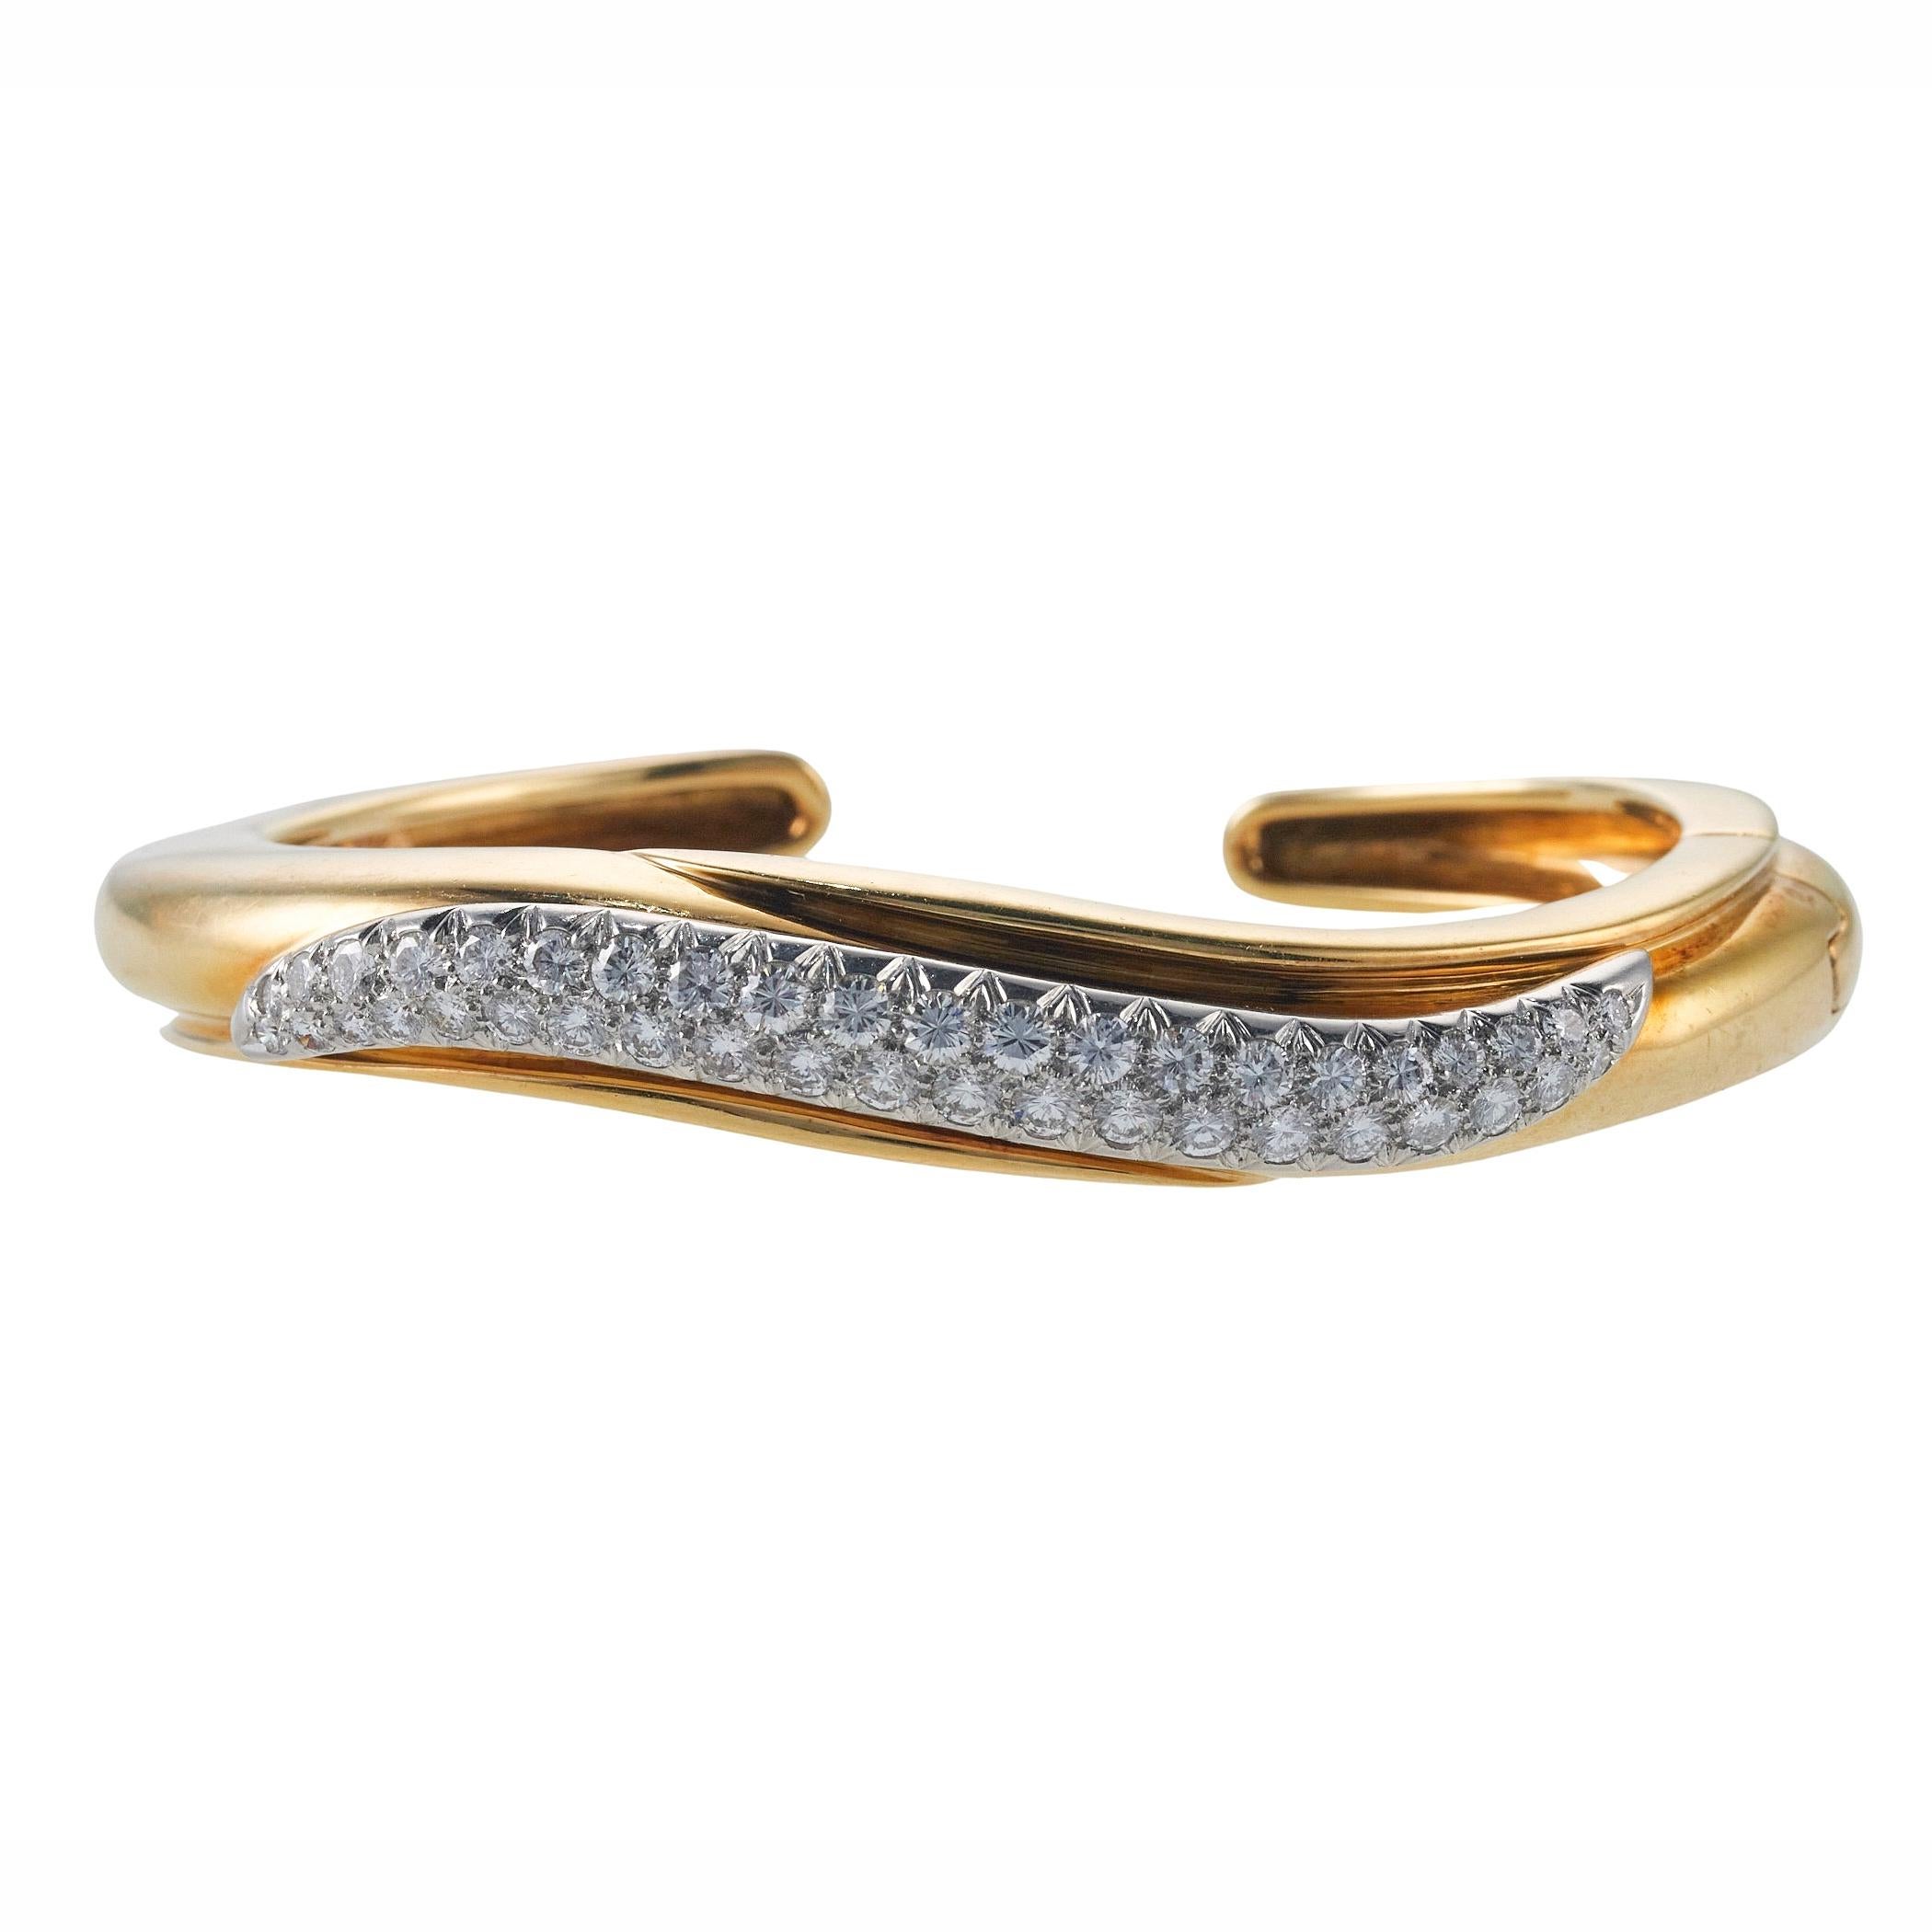 18k yellow gold and platinum wave cuff bracelet, set with approx. 2.50ctw in VS-SI/G-H diamonds. Bracelet will fit approx. 7